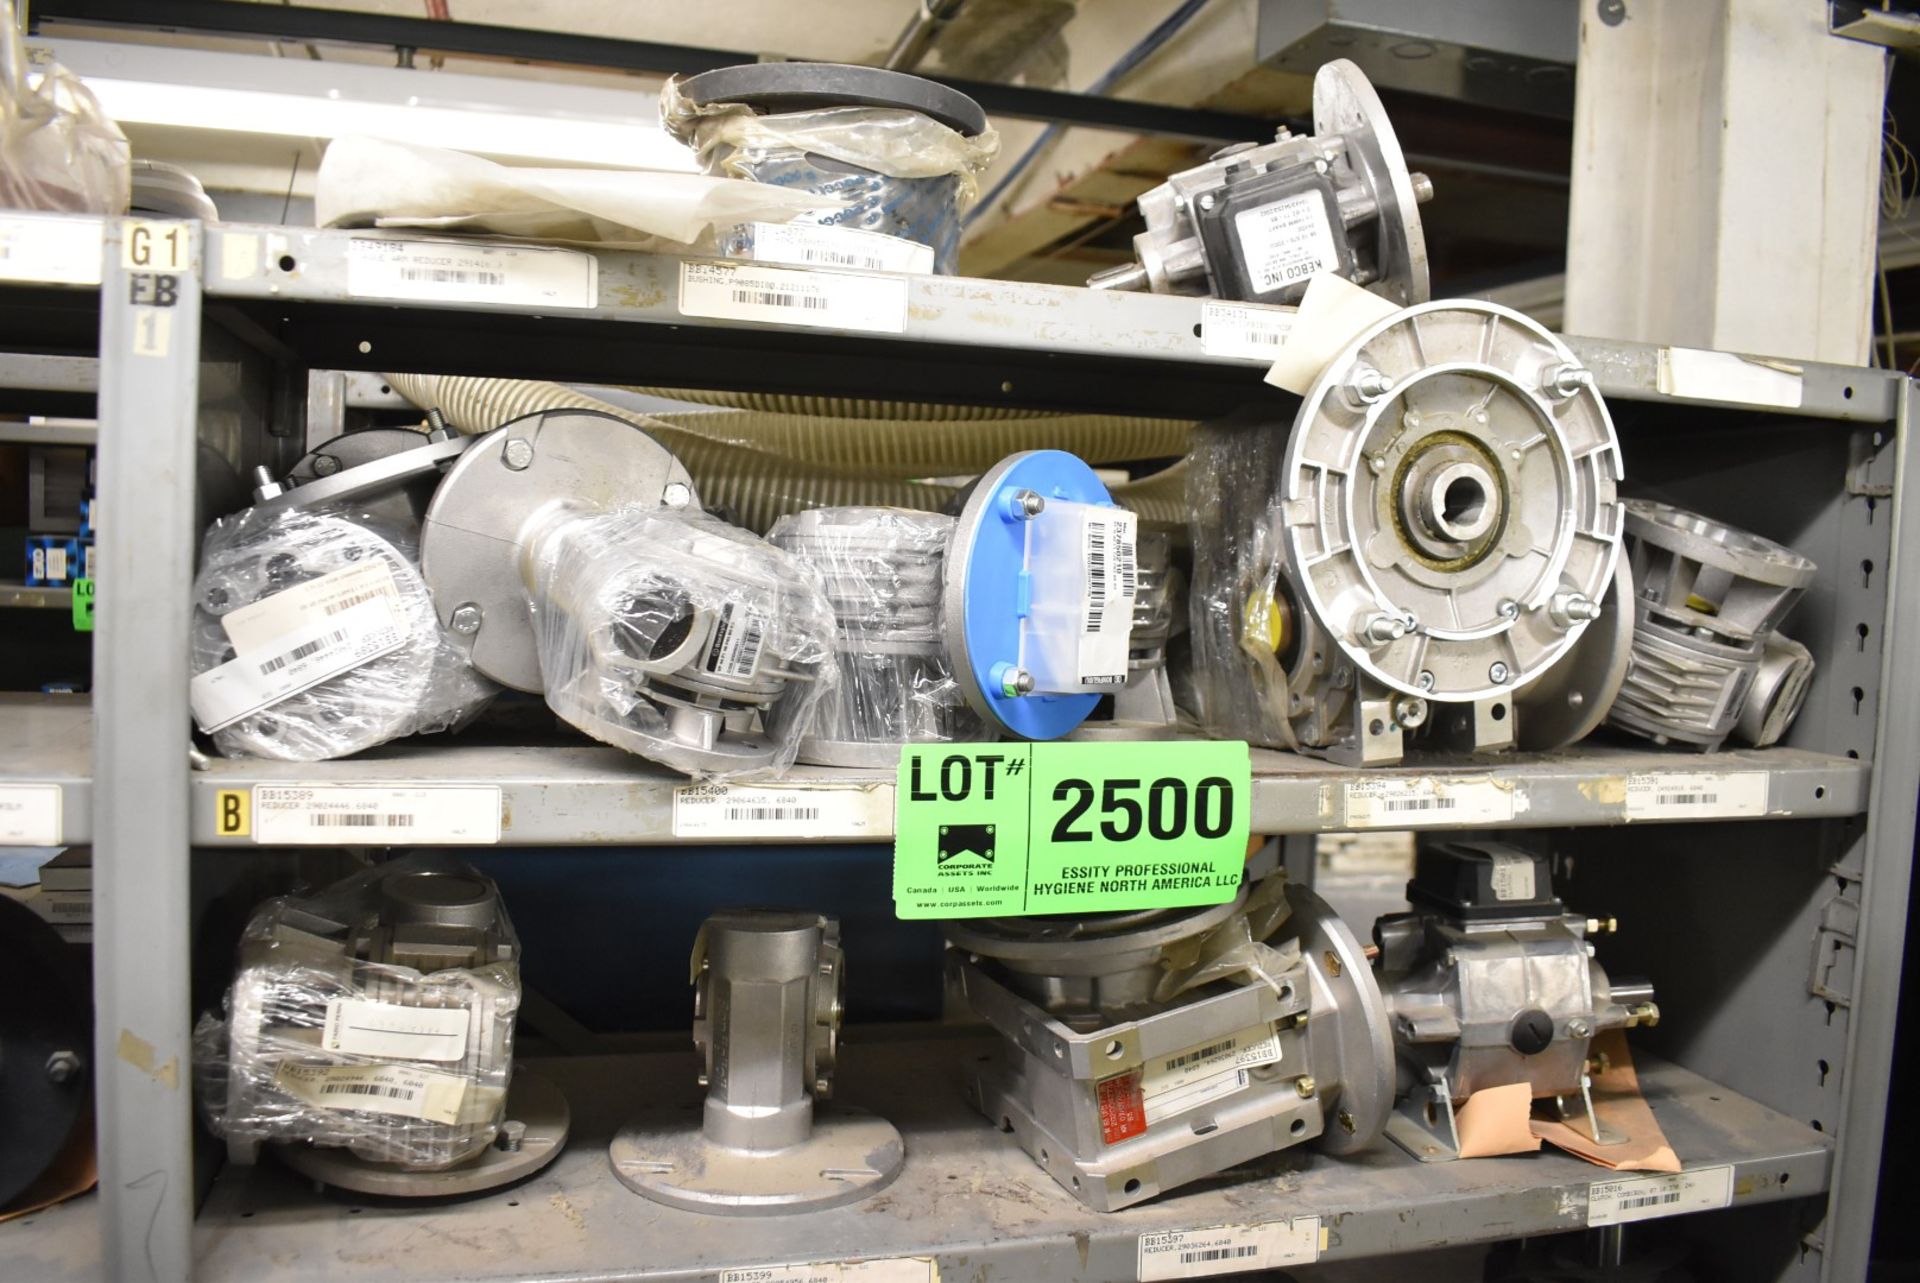 LOT/ CONTENTS OF (3) SHELVES - INCLUDING REDUCERS, CLUTCHES [RIGGING FEES FOR LOT #2500 - $TBD USD